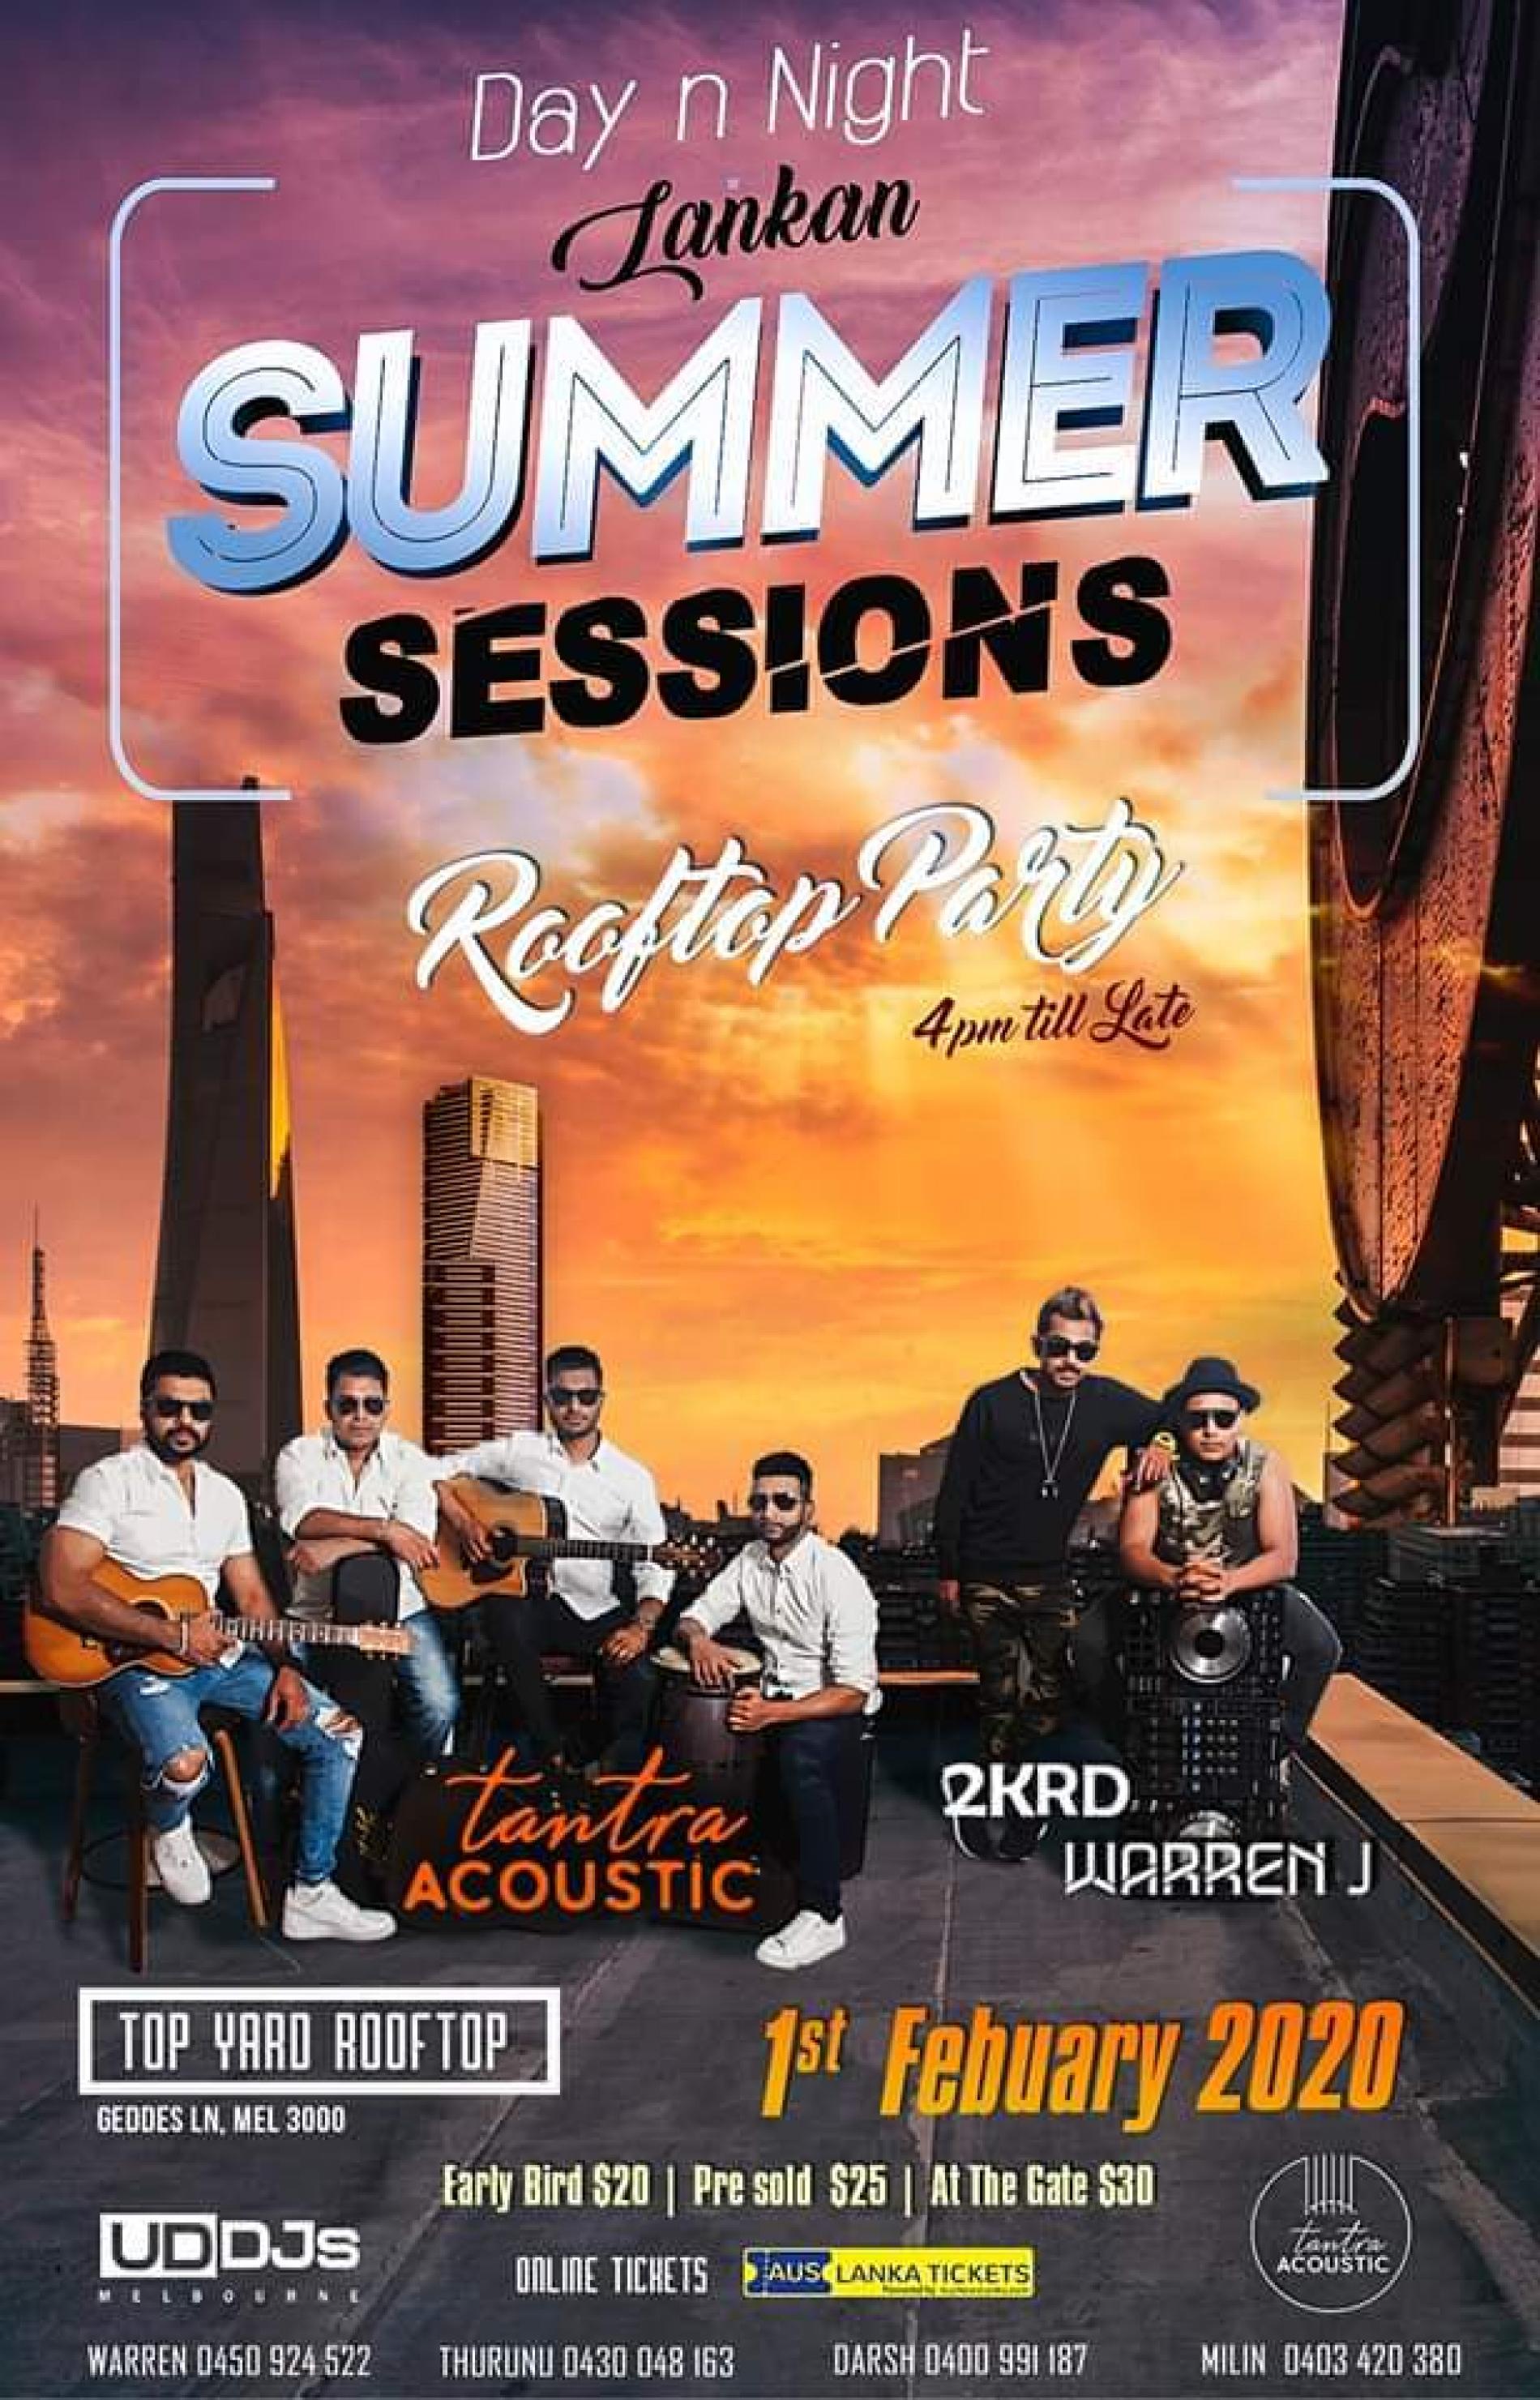 Day N Night Lankan Summer Sessions Rooftop Party